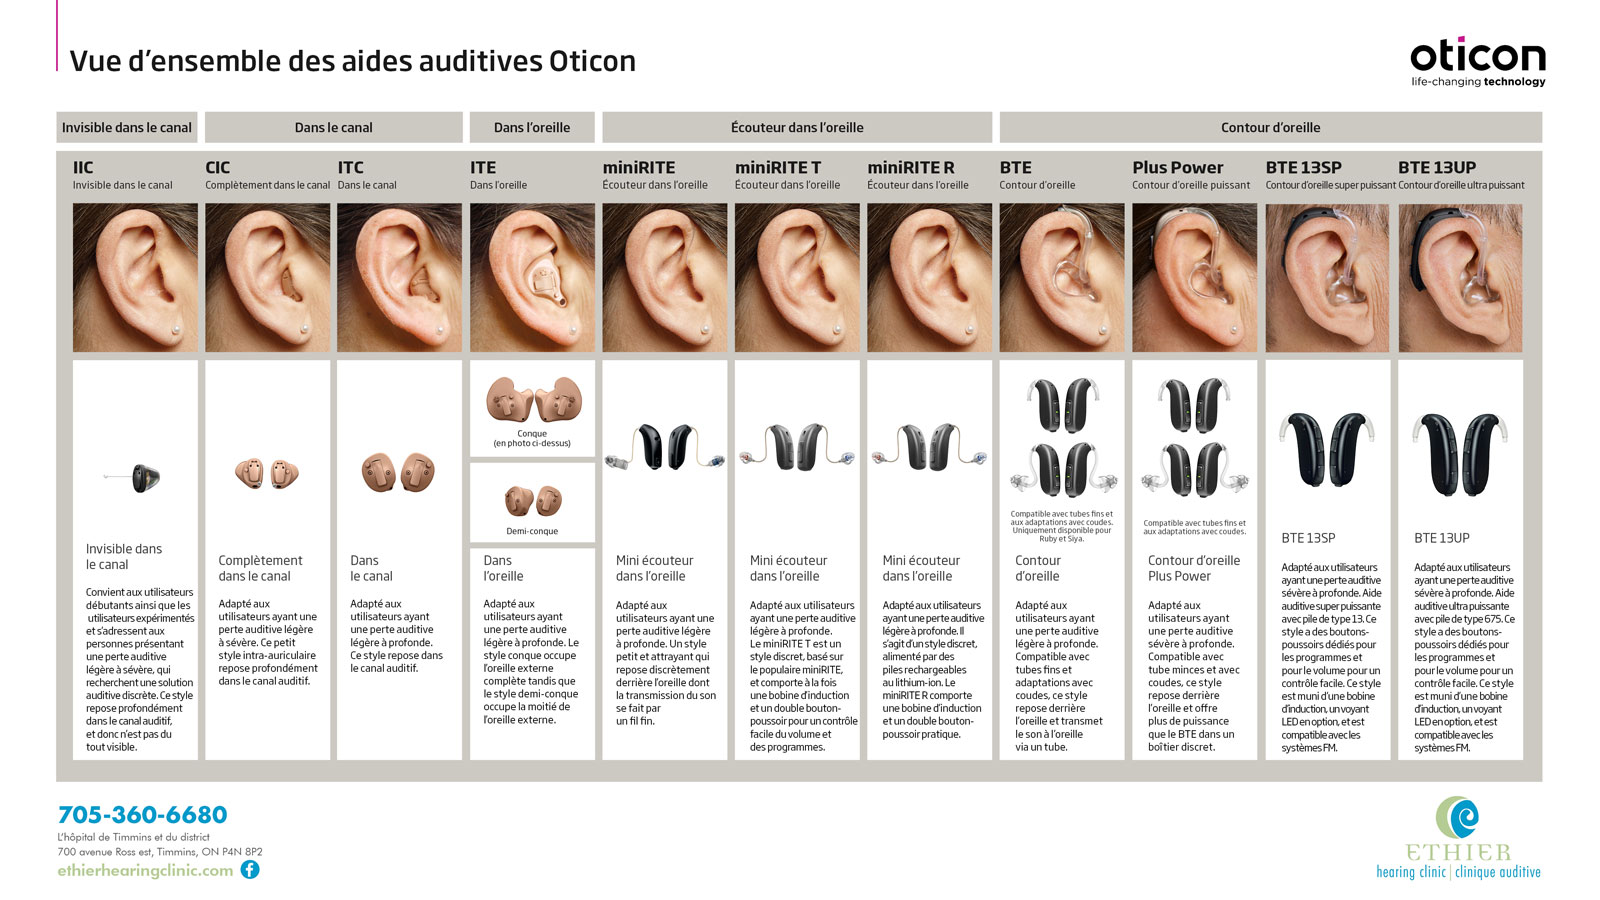 Overview of all the different hearing aids available